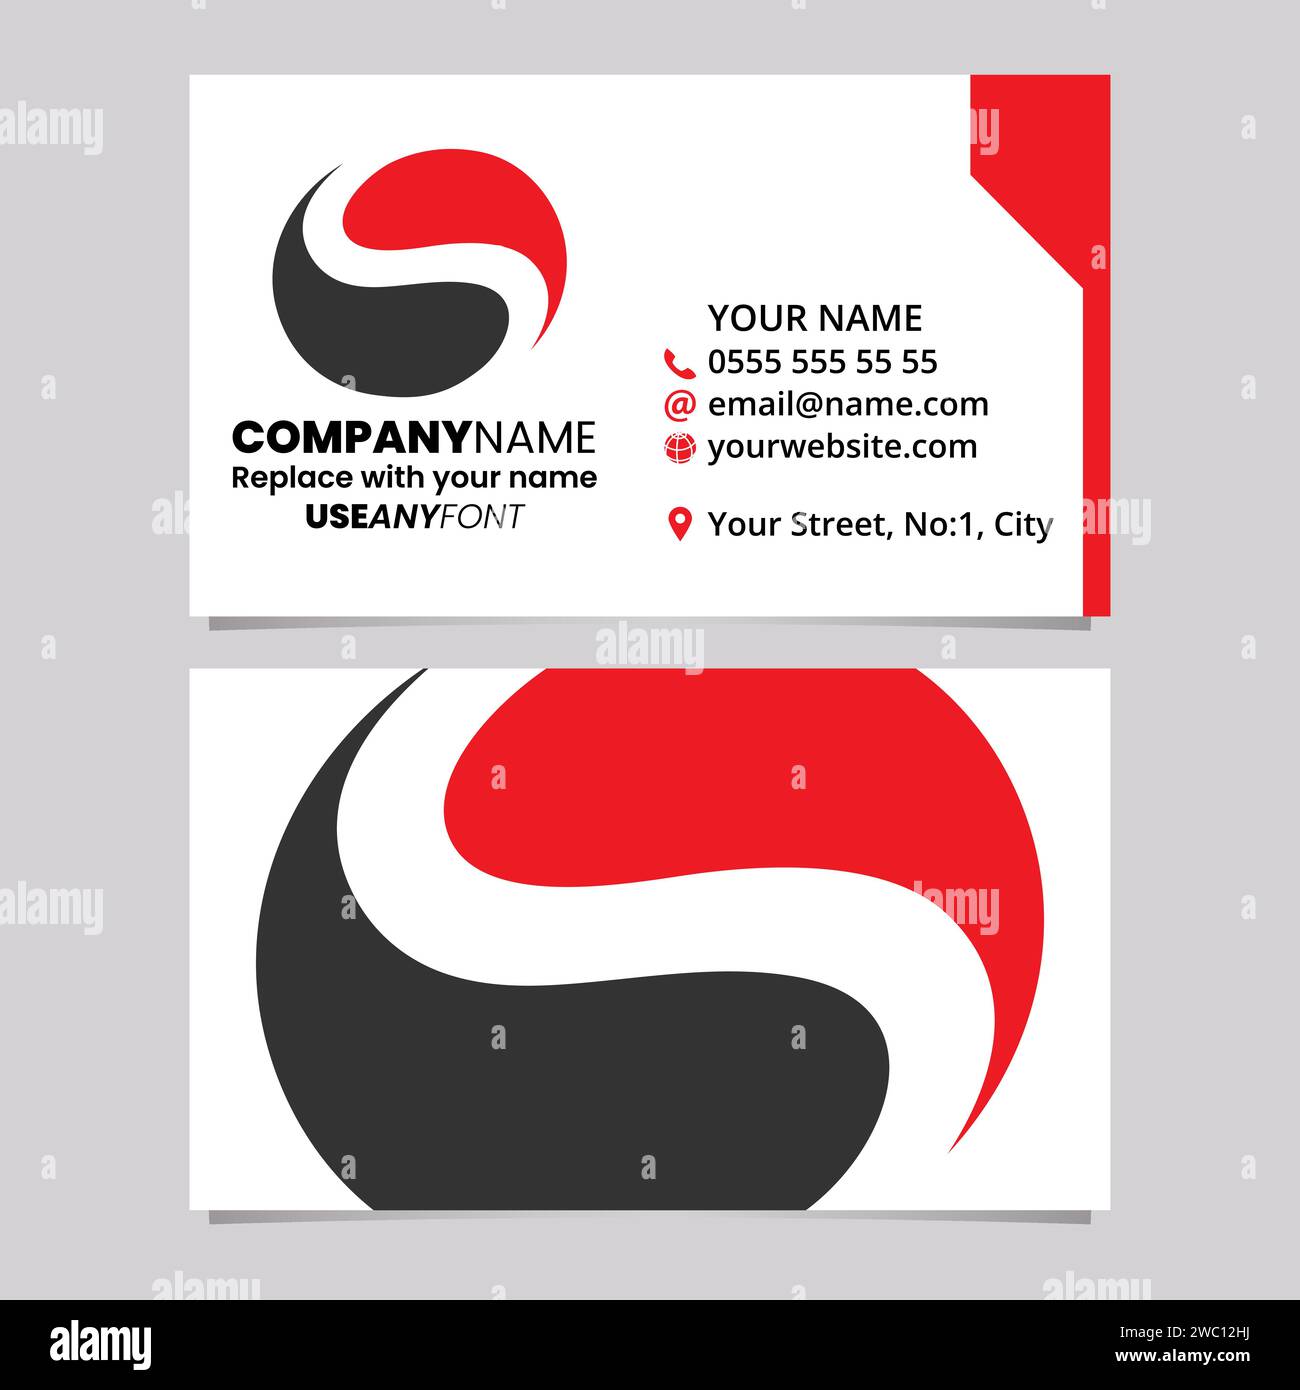 Red and Black Business Card Template with Circle Shaped Letter S Logo Icon Over a Light Grey Background Stock Vector